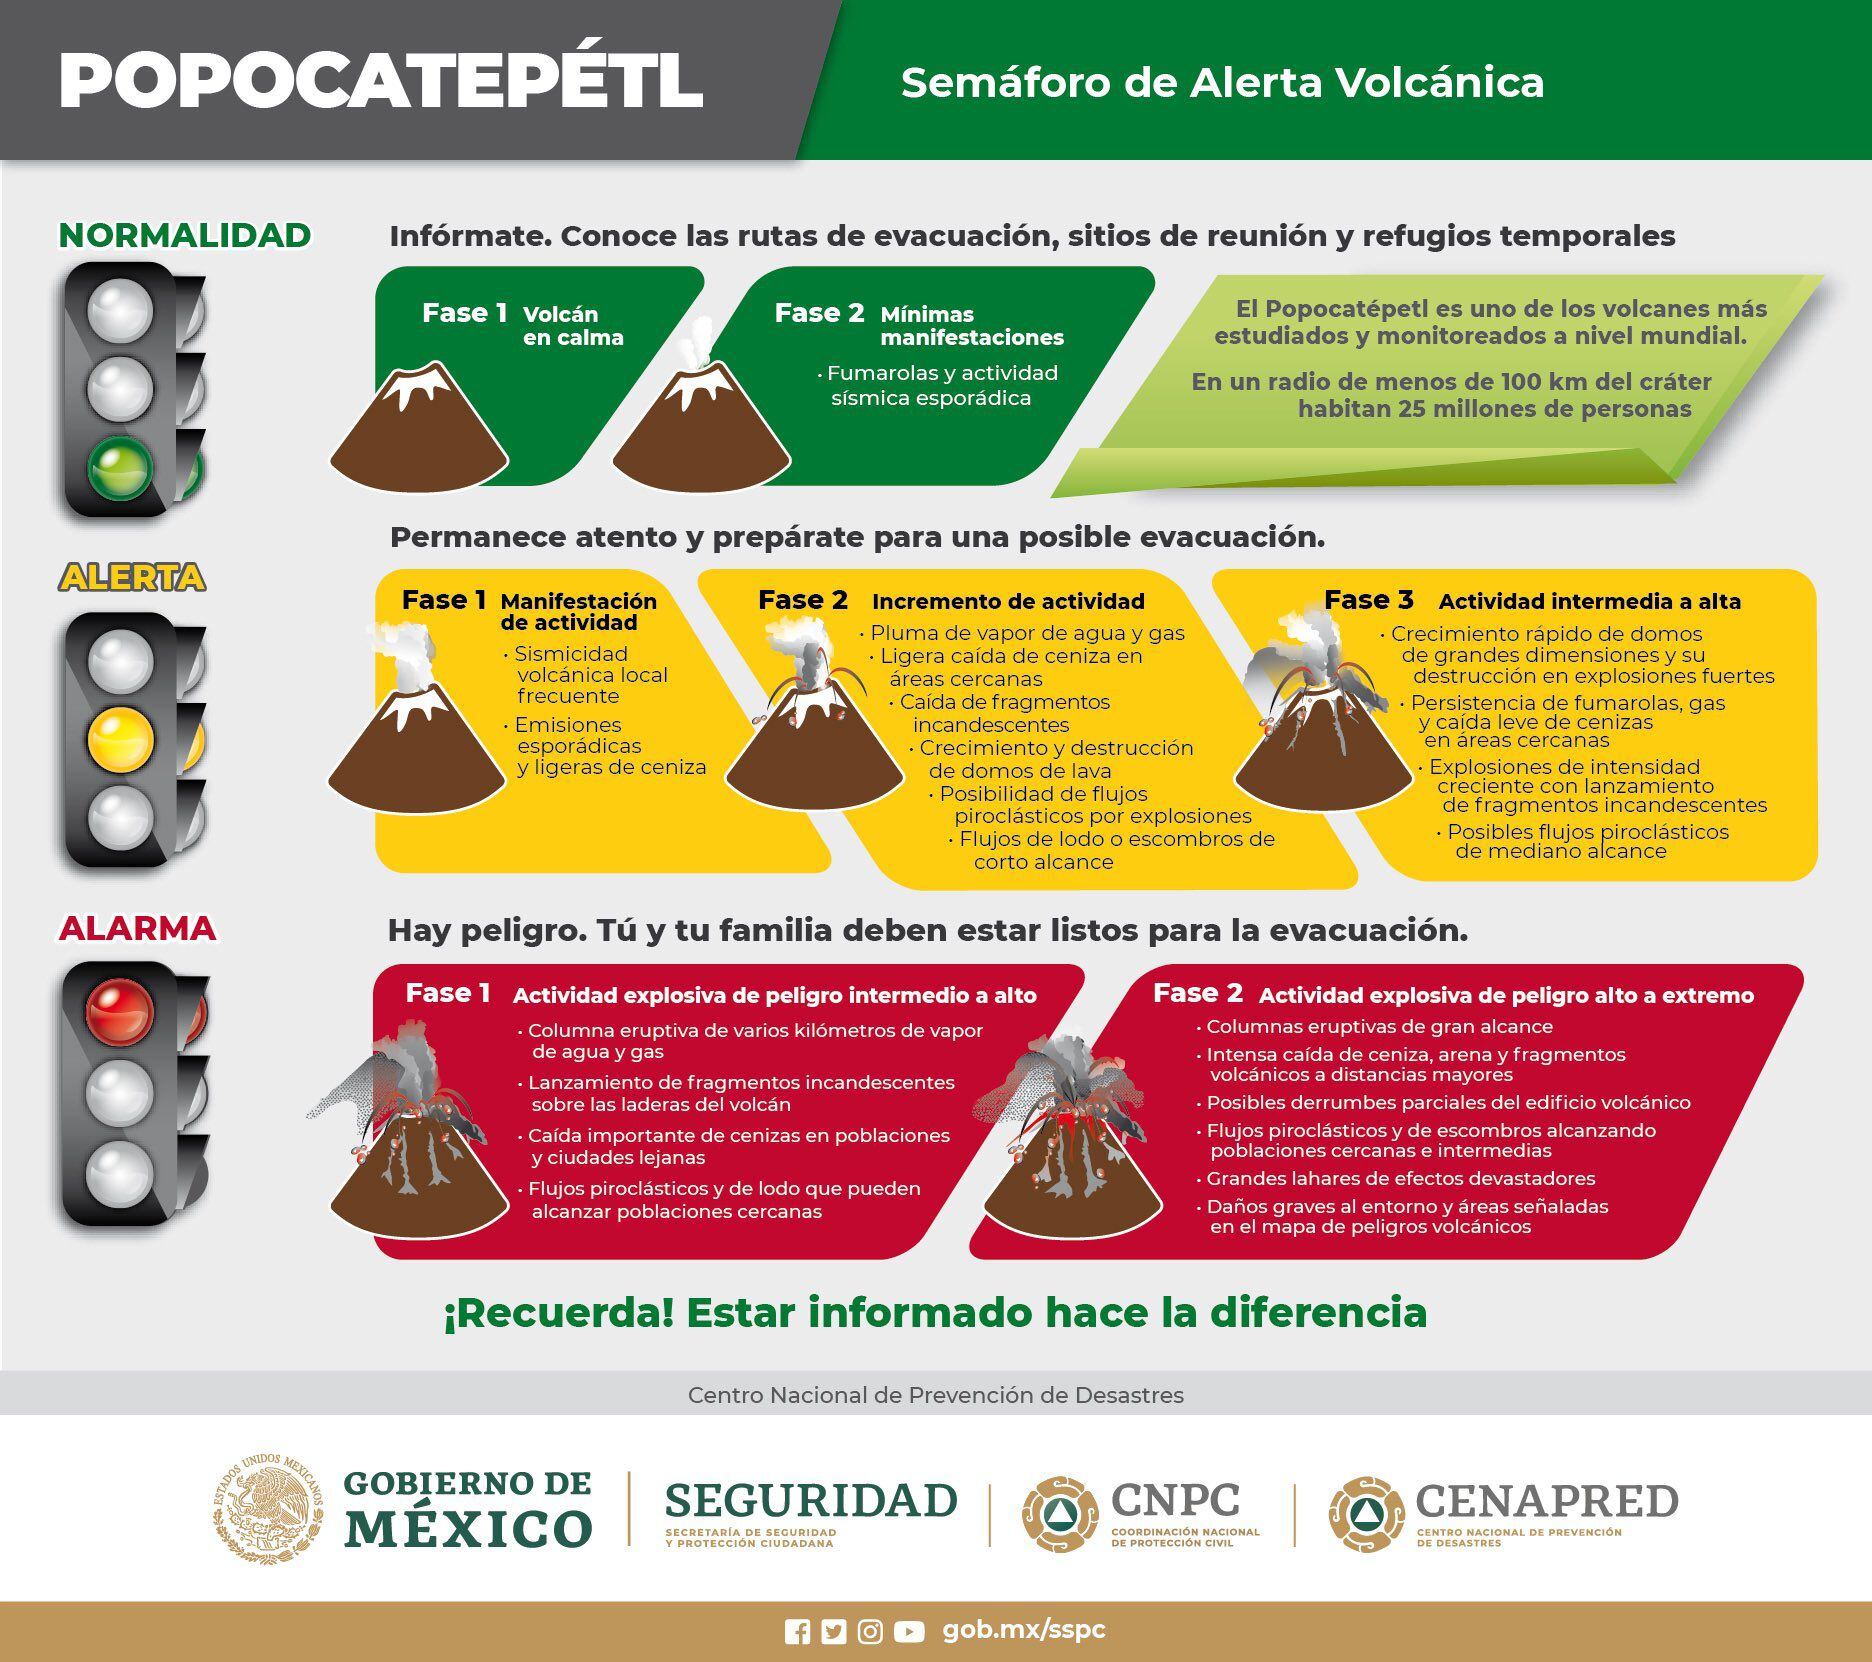 Intense activity of the Popocatépetl volcano May 20: routes and states that affect the fall of ash